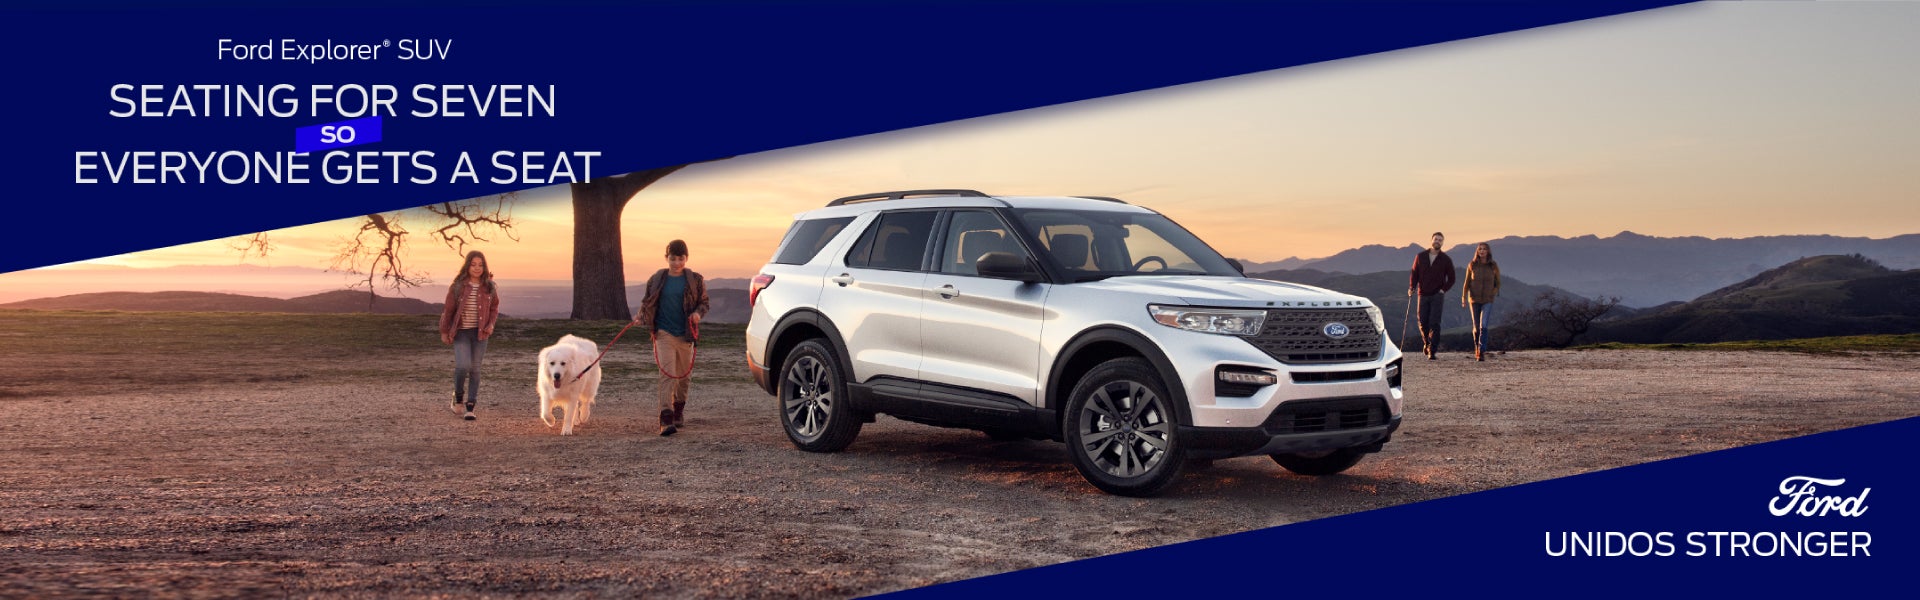 Ford Explorer® SUV – Visalia Ford is Unidos Stronger